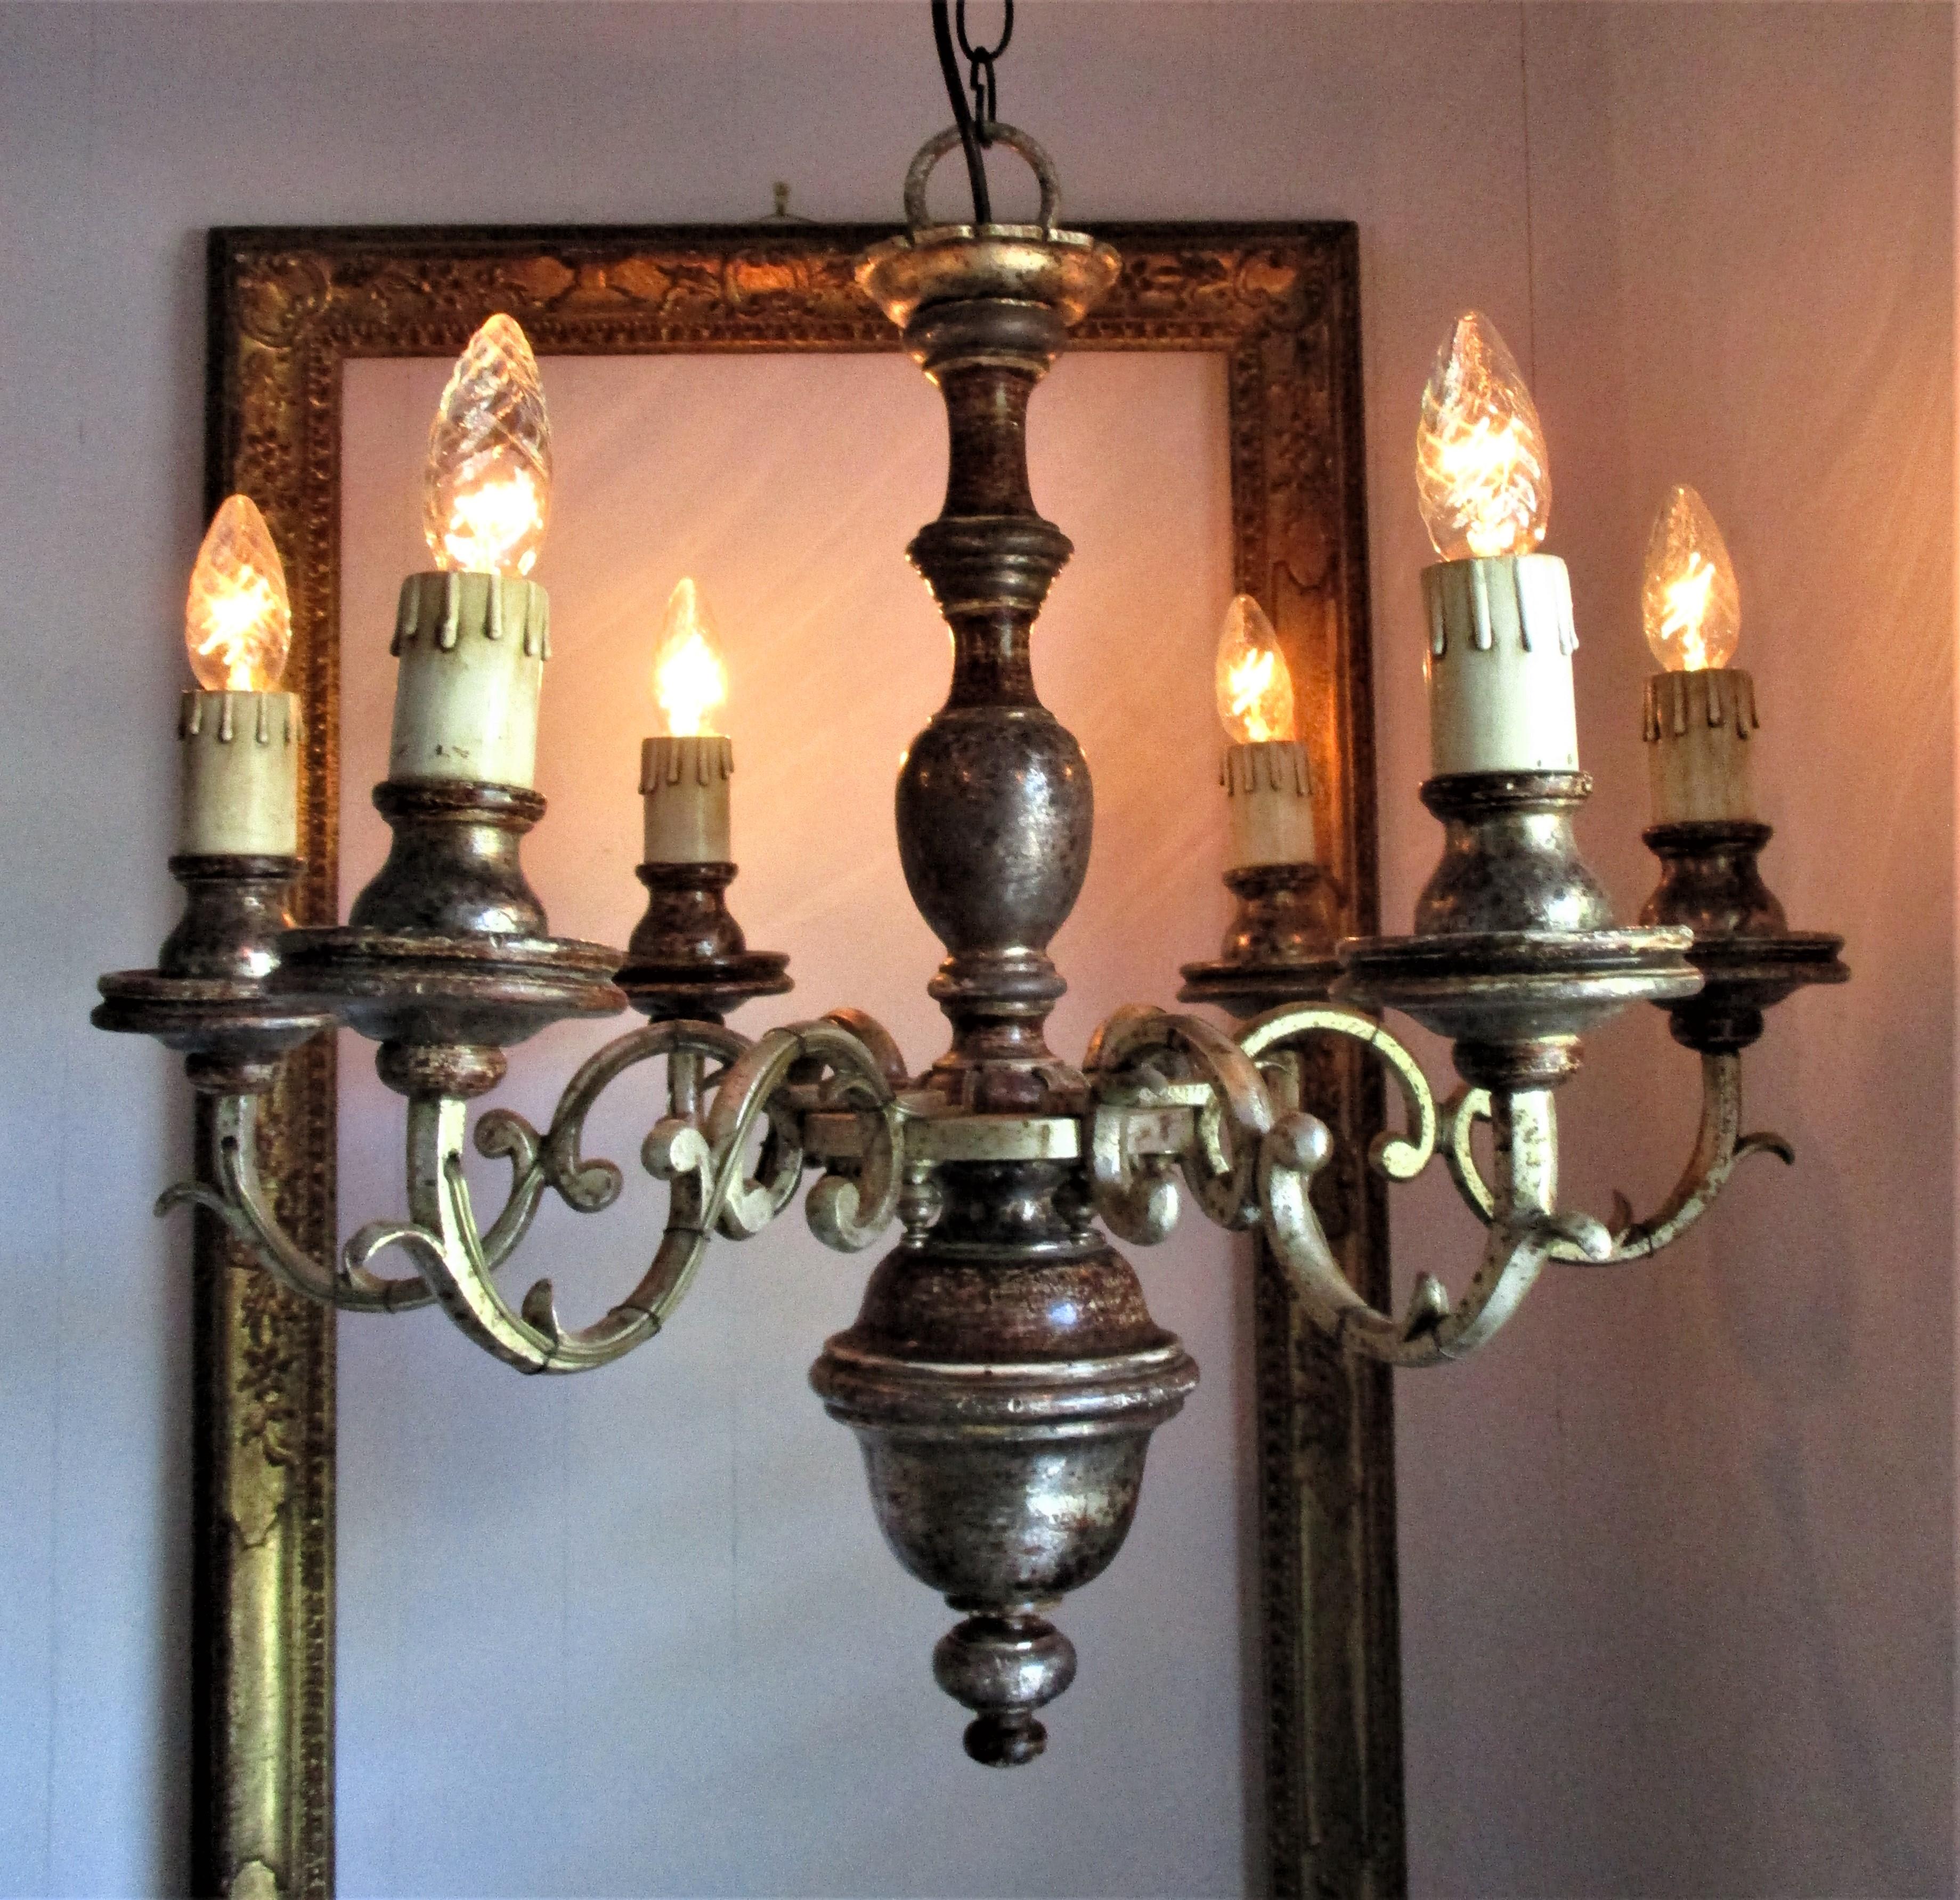 Rustic Italian 19th century painted silver gilt iron 6-arm chandelier. Tuscan carved wood and iron chandelier with great character.